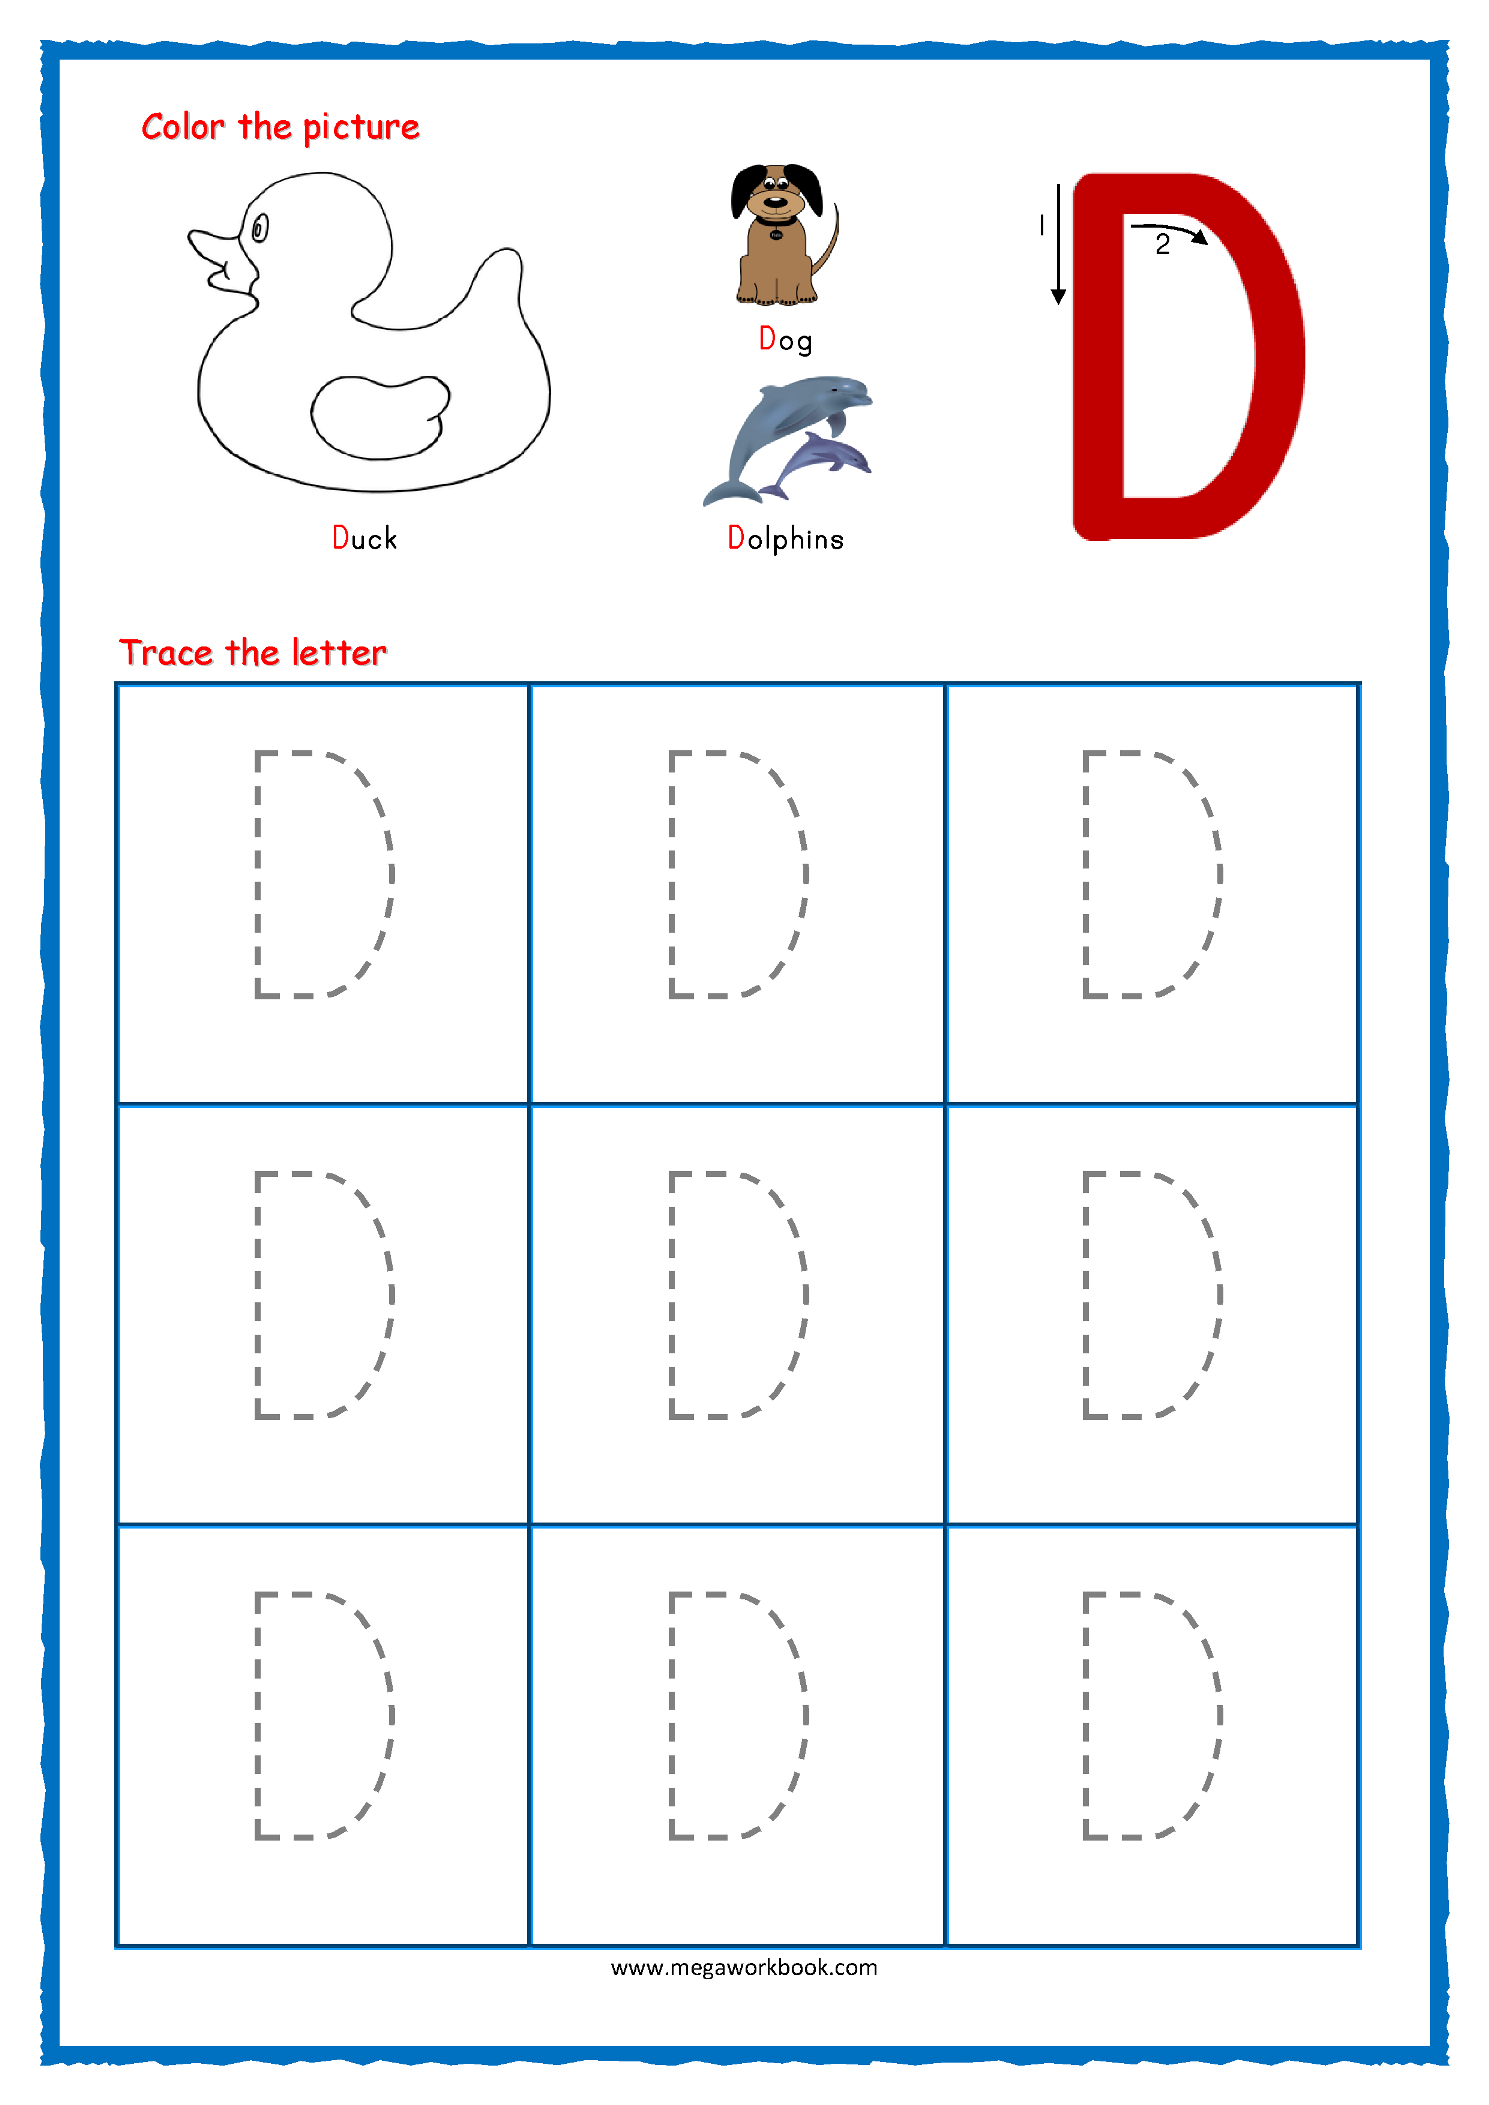 Tracing Letters - Alphabet Tracing - Capital Letters regarding Capital Letters Alphabet Tracing Sheets